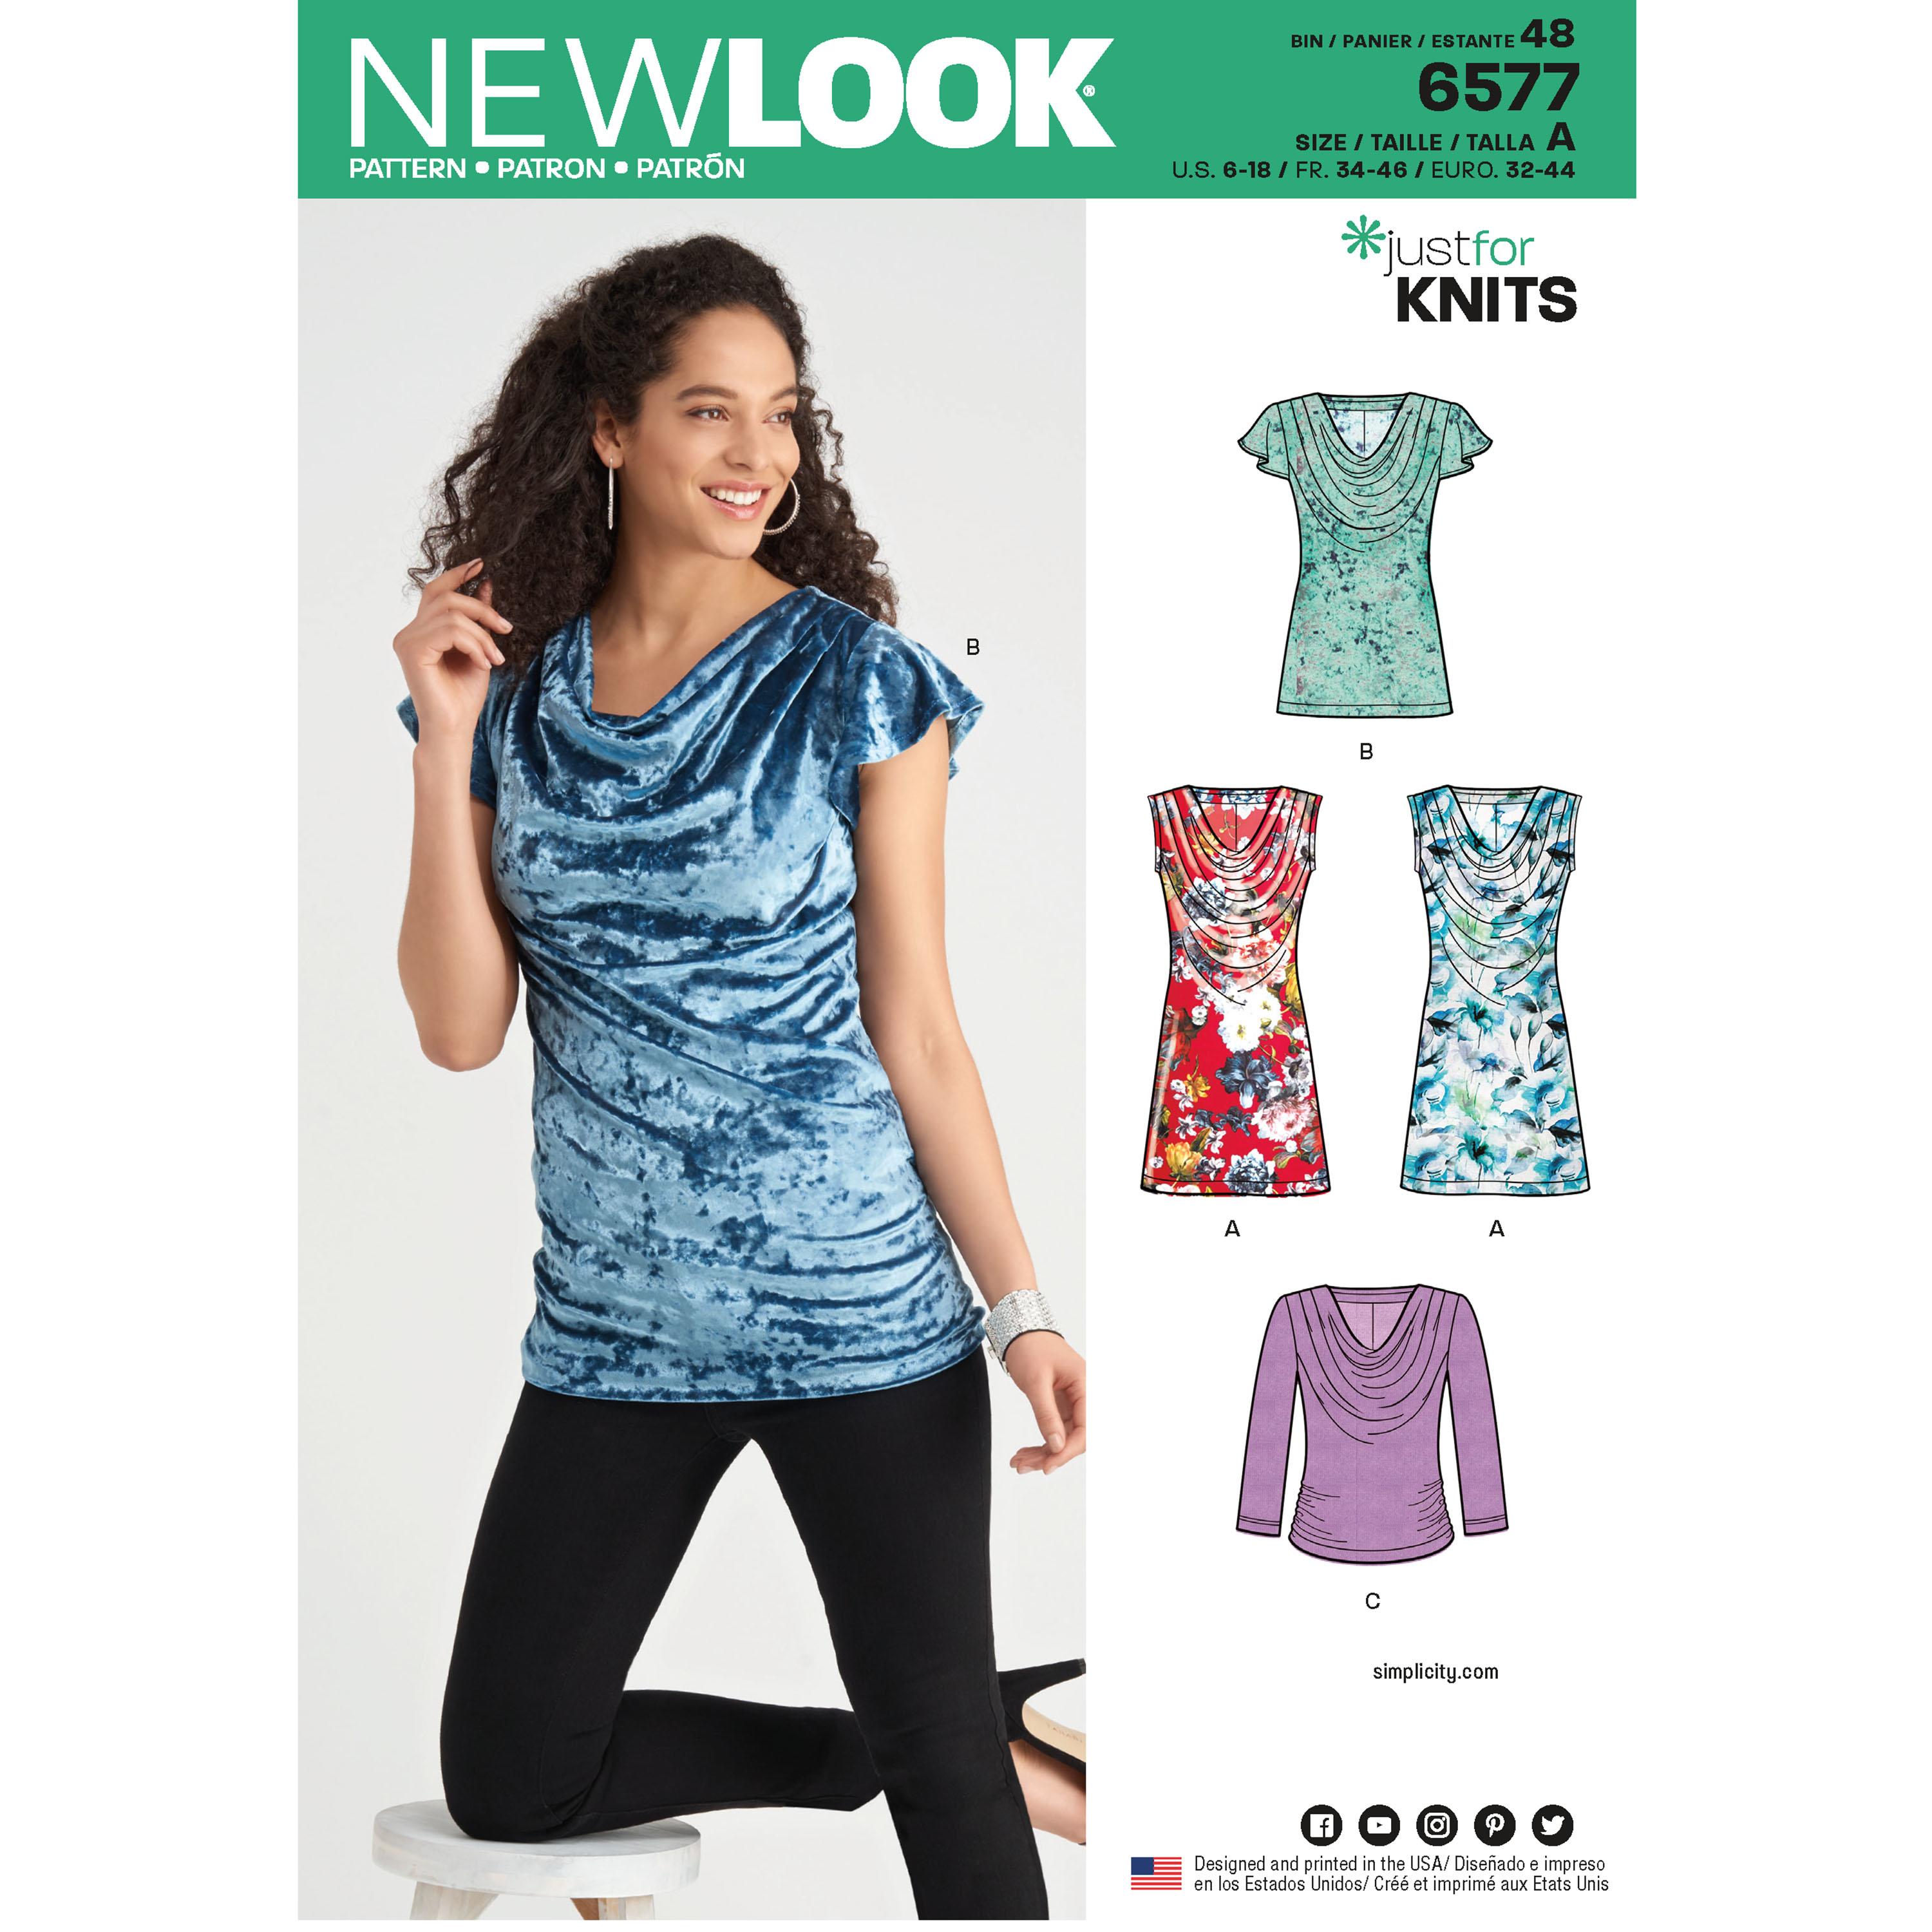 NewLook N6577 Misses' Knit Tops